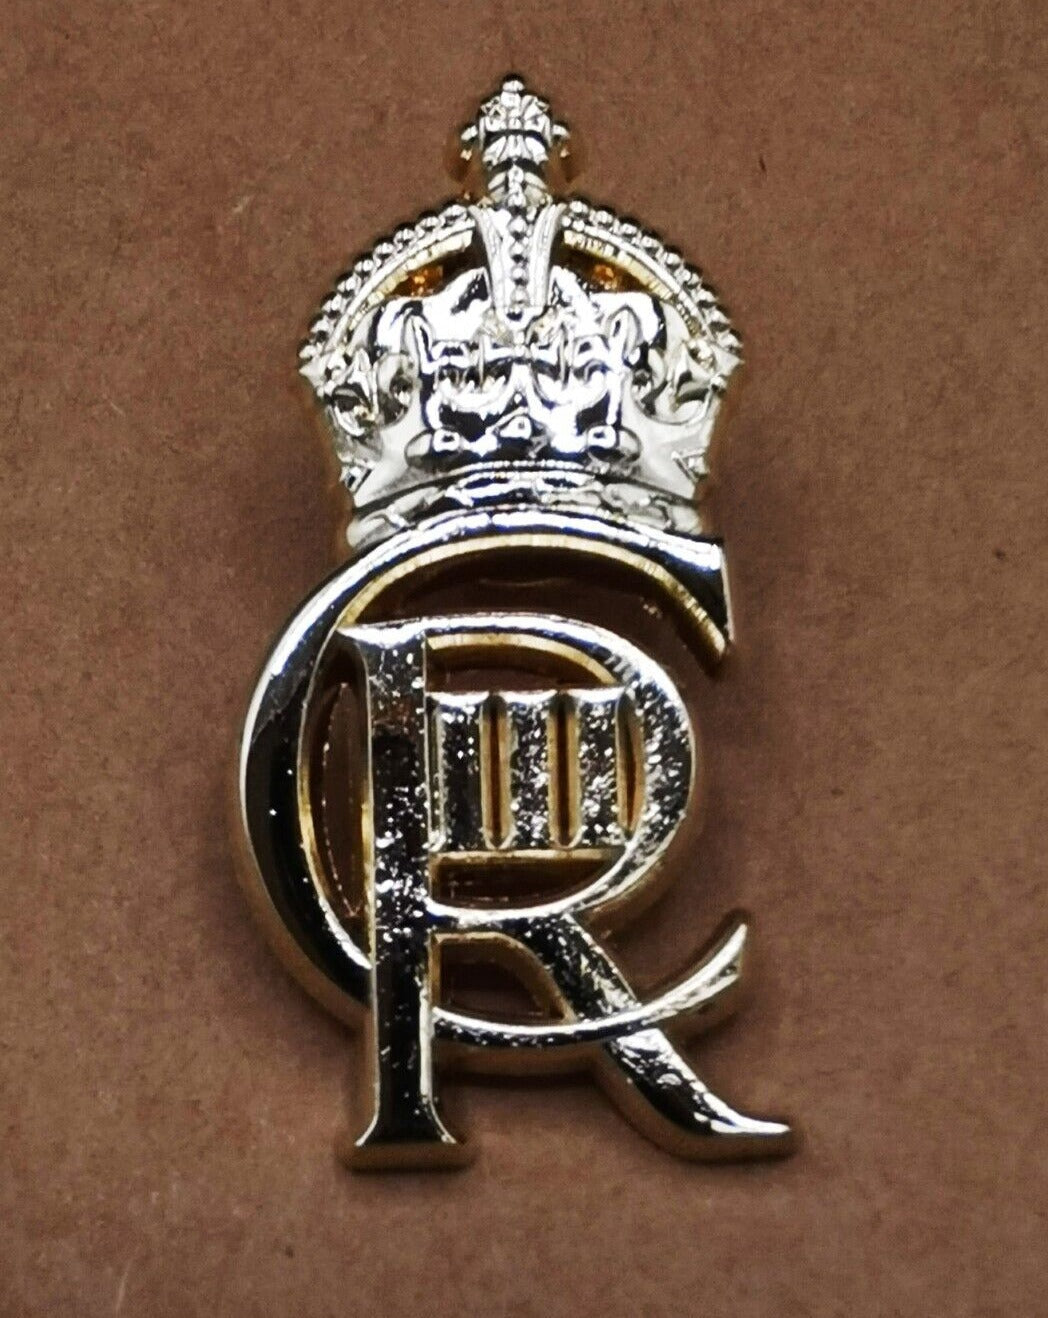 King Charles III Gold-Plated Royal Cypher Brooch